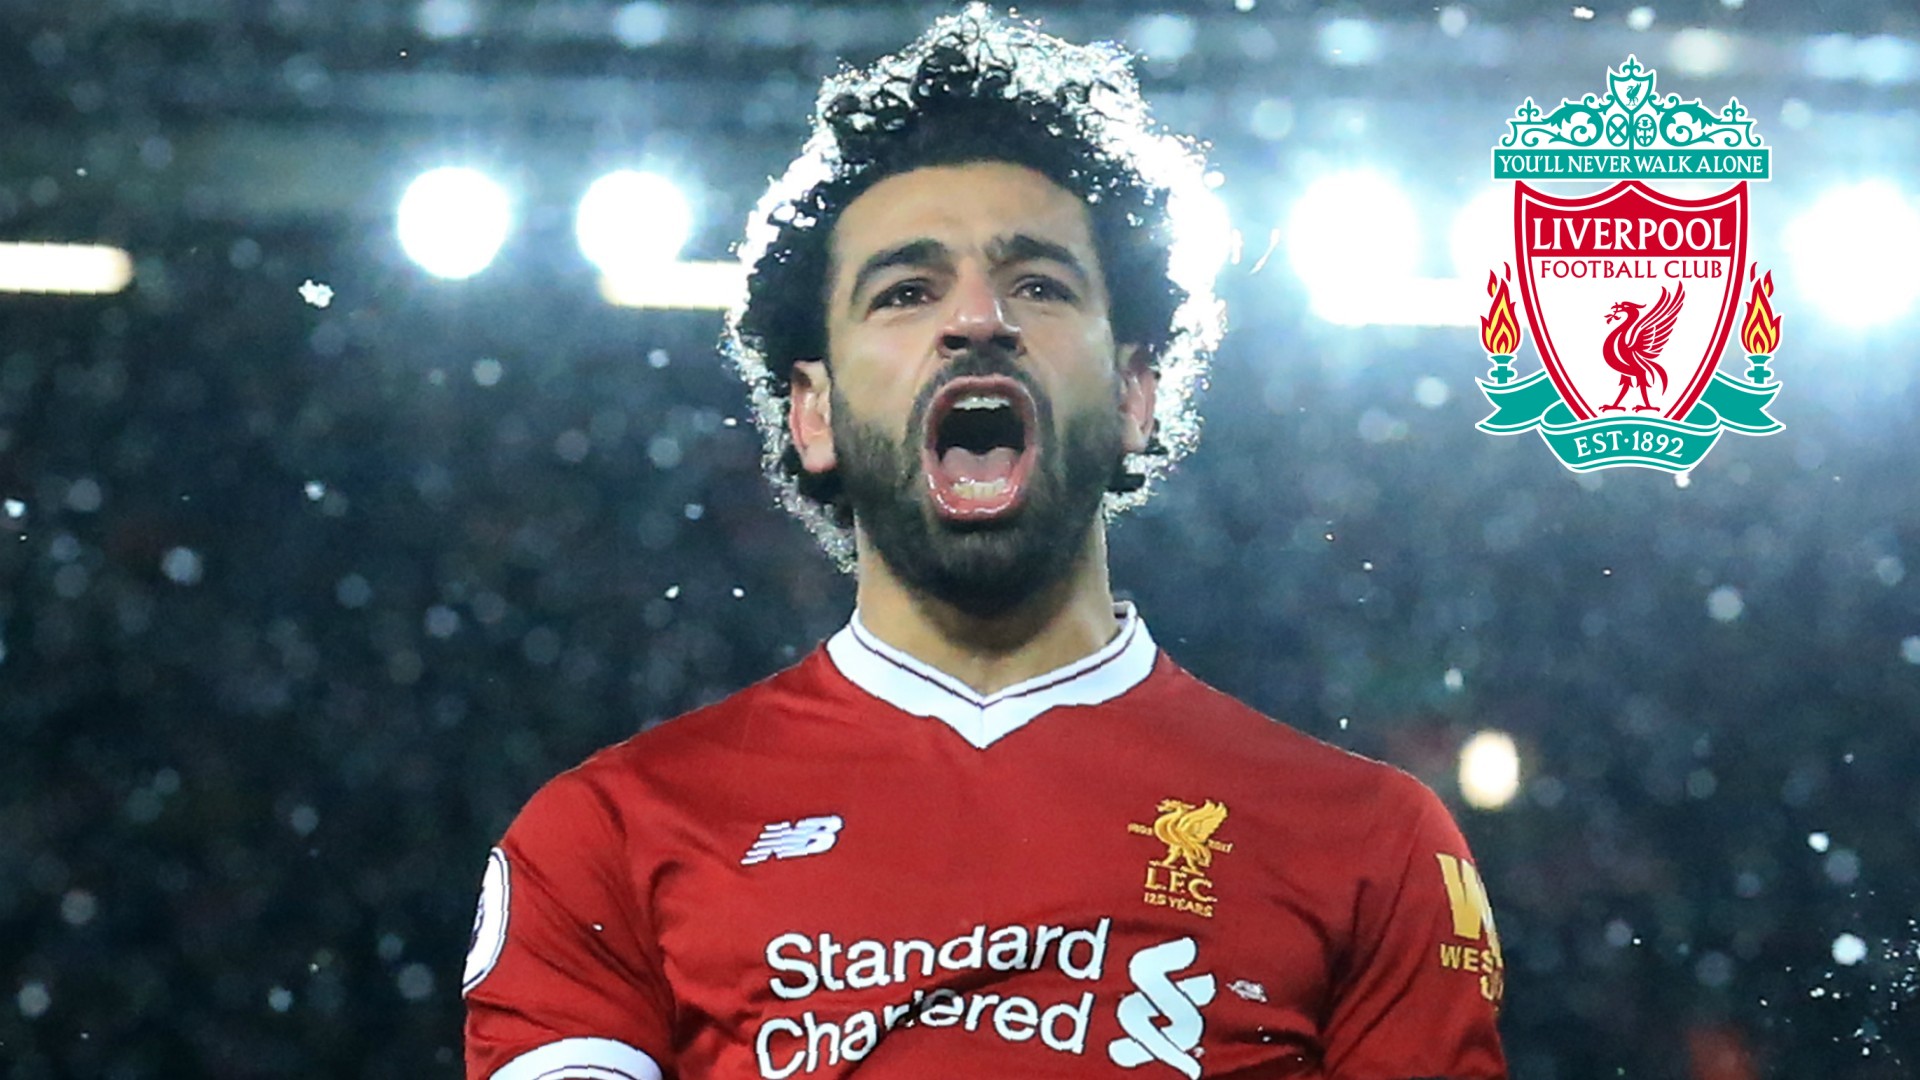 HD Liverpool Mohamed Salah Backgrounds with image resolution 1920x1080 pixel. You can use this wallpaper as background for your desktop Computer Screensavers, Android or iPhone smartphones